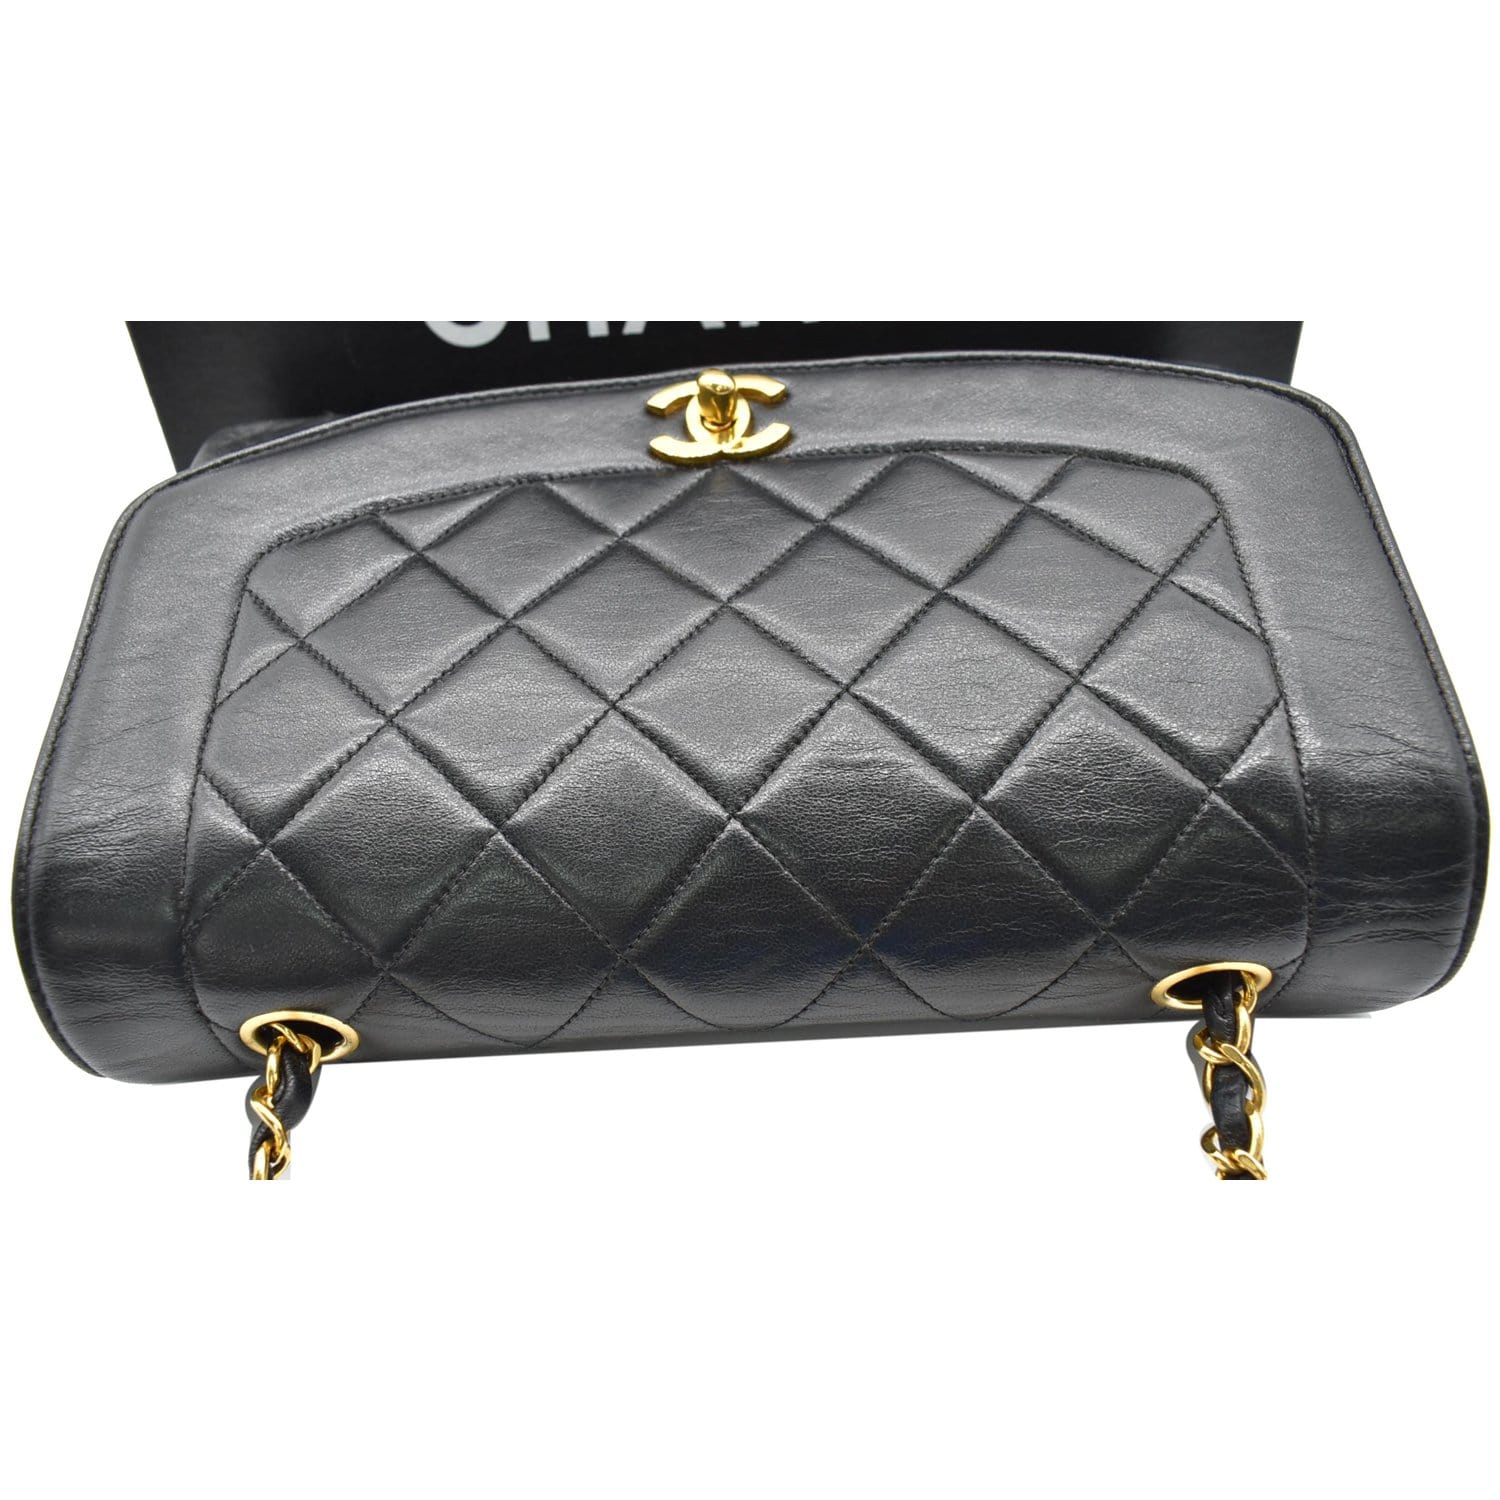 Pre-Owned CHANEL Chanel matelasse Diana 22 bag 94's lambskin